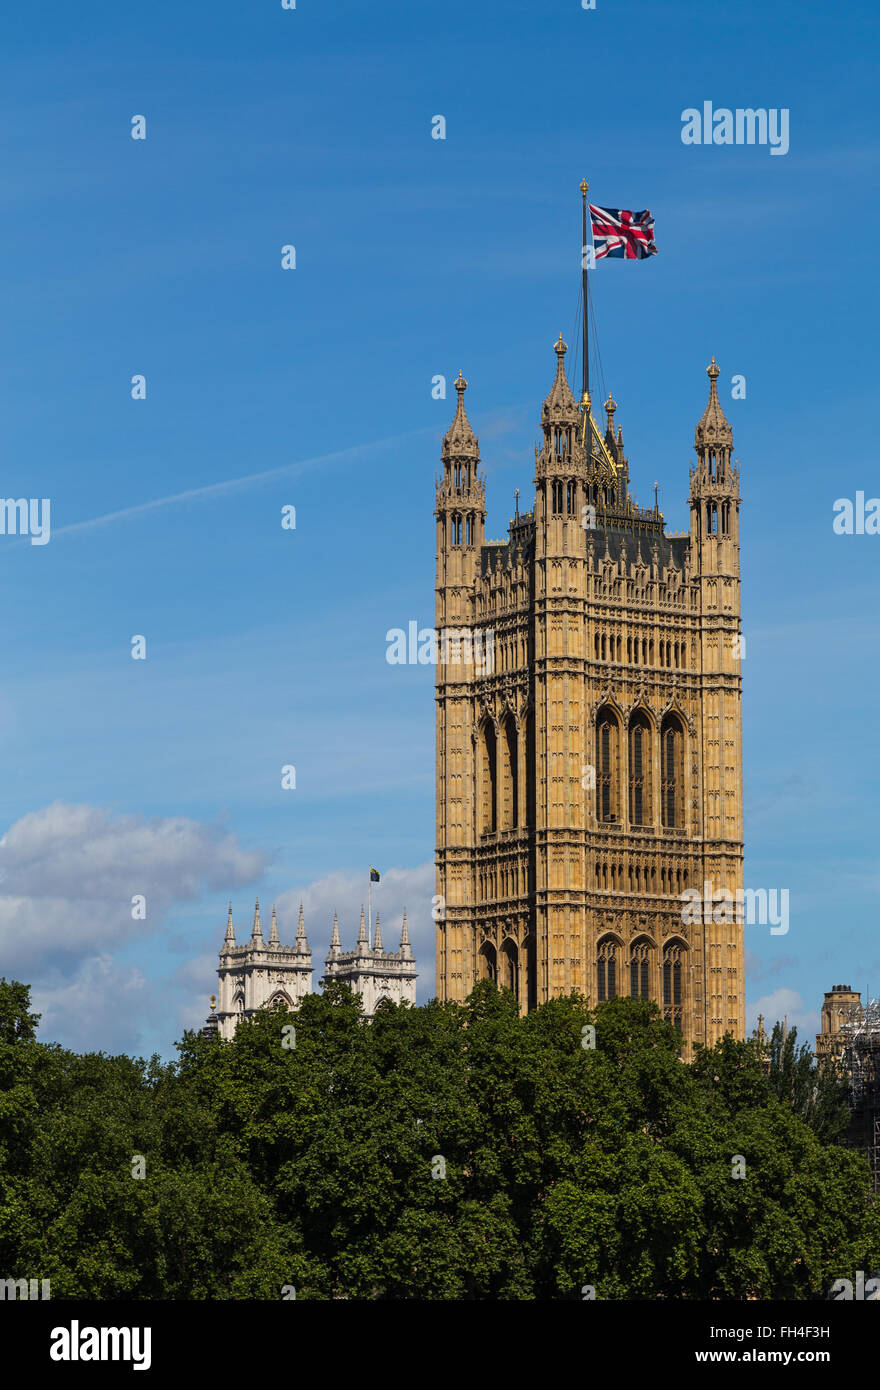 The Victoria Tower in London during the summer with the Union Jack Flag flying at the top of it Stock Photo